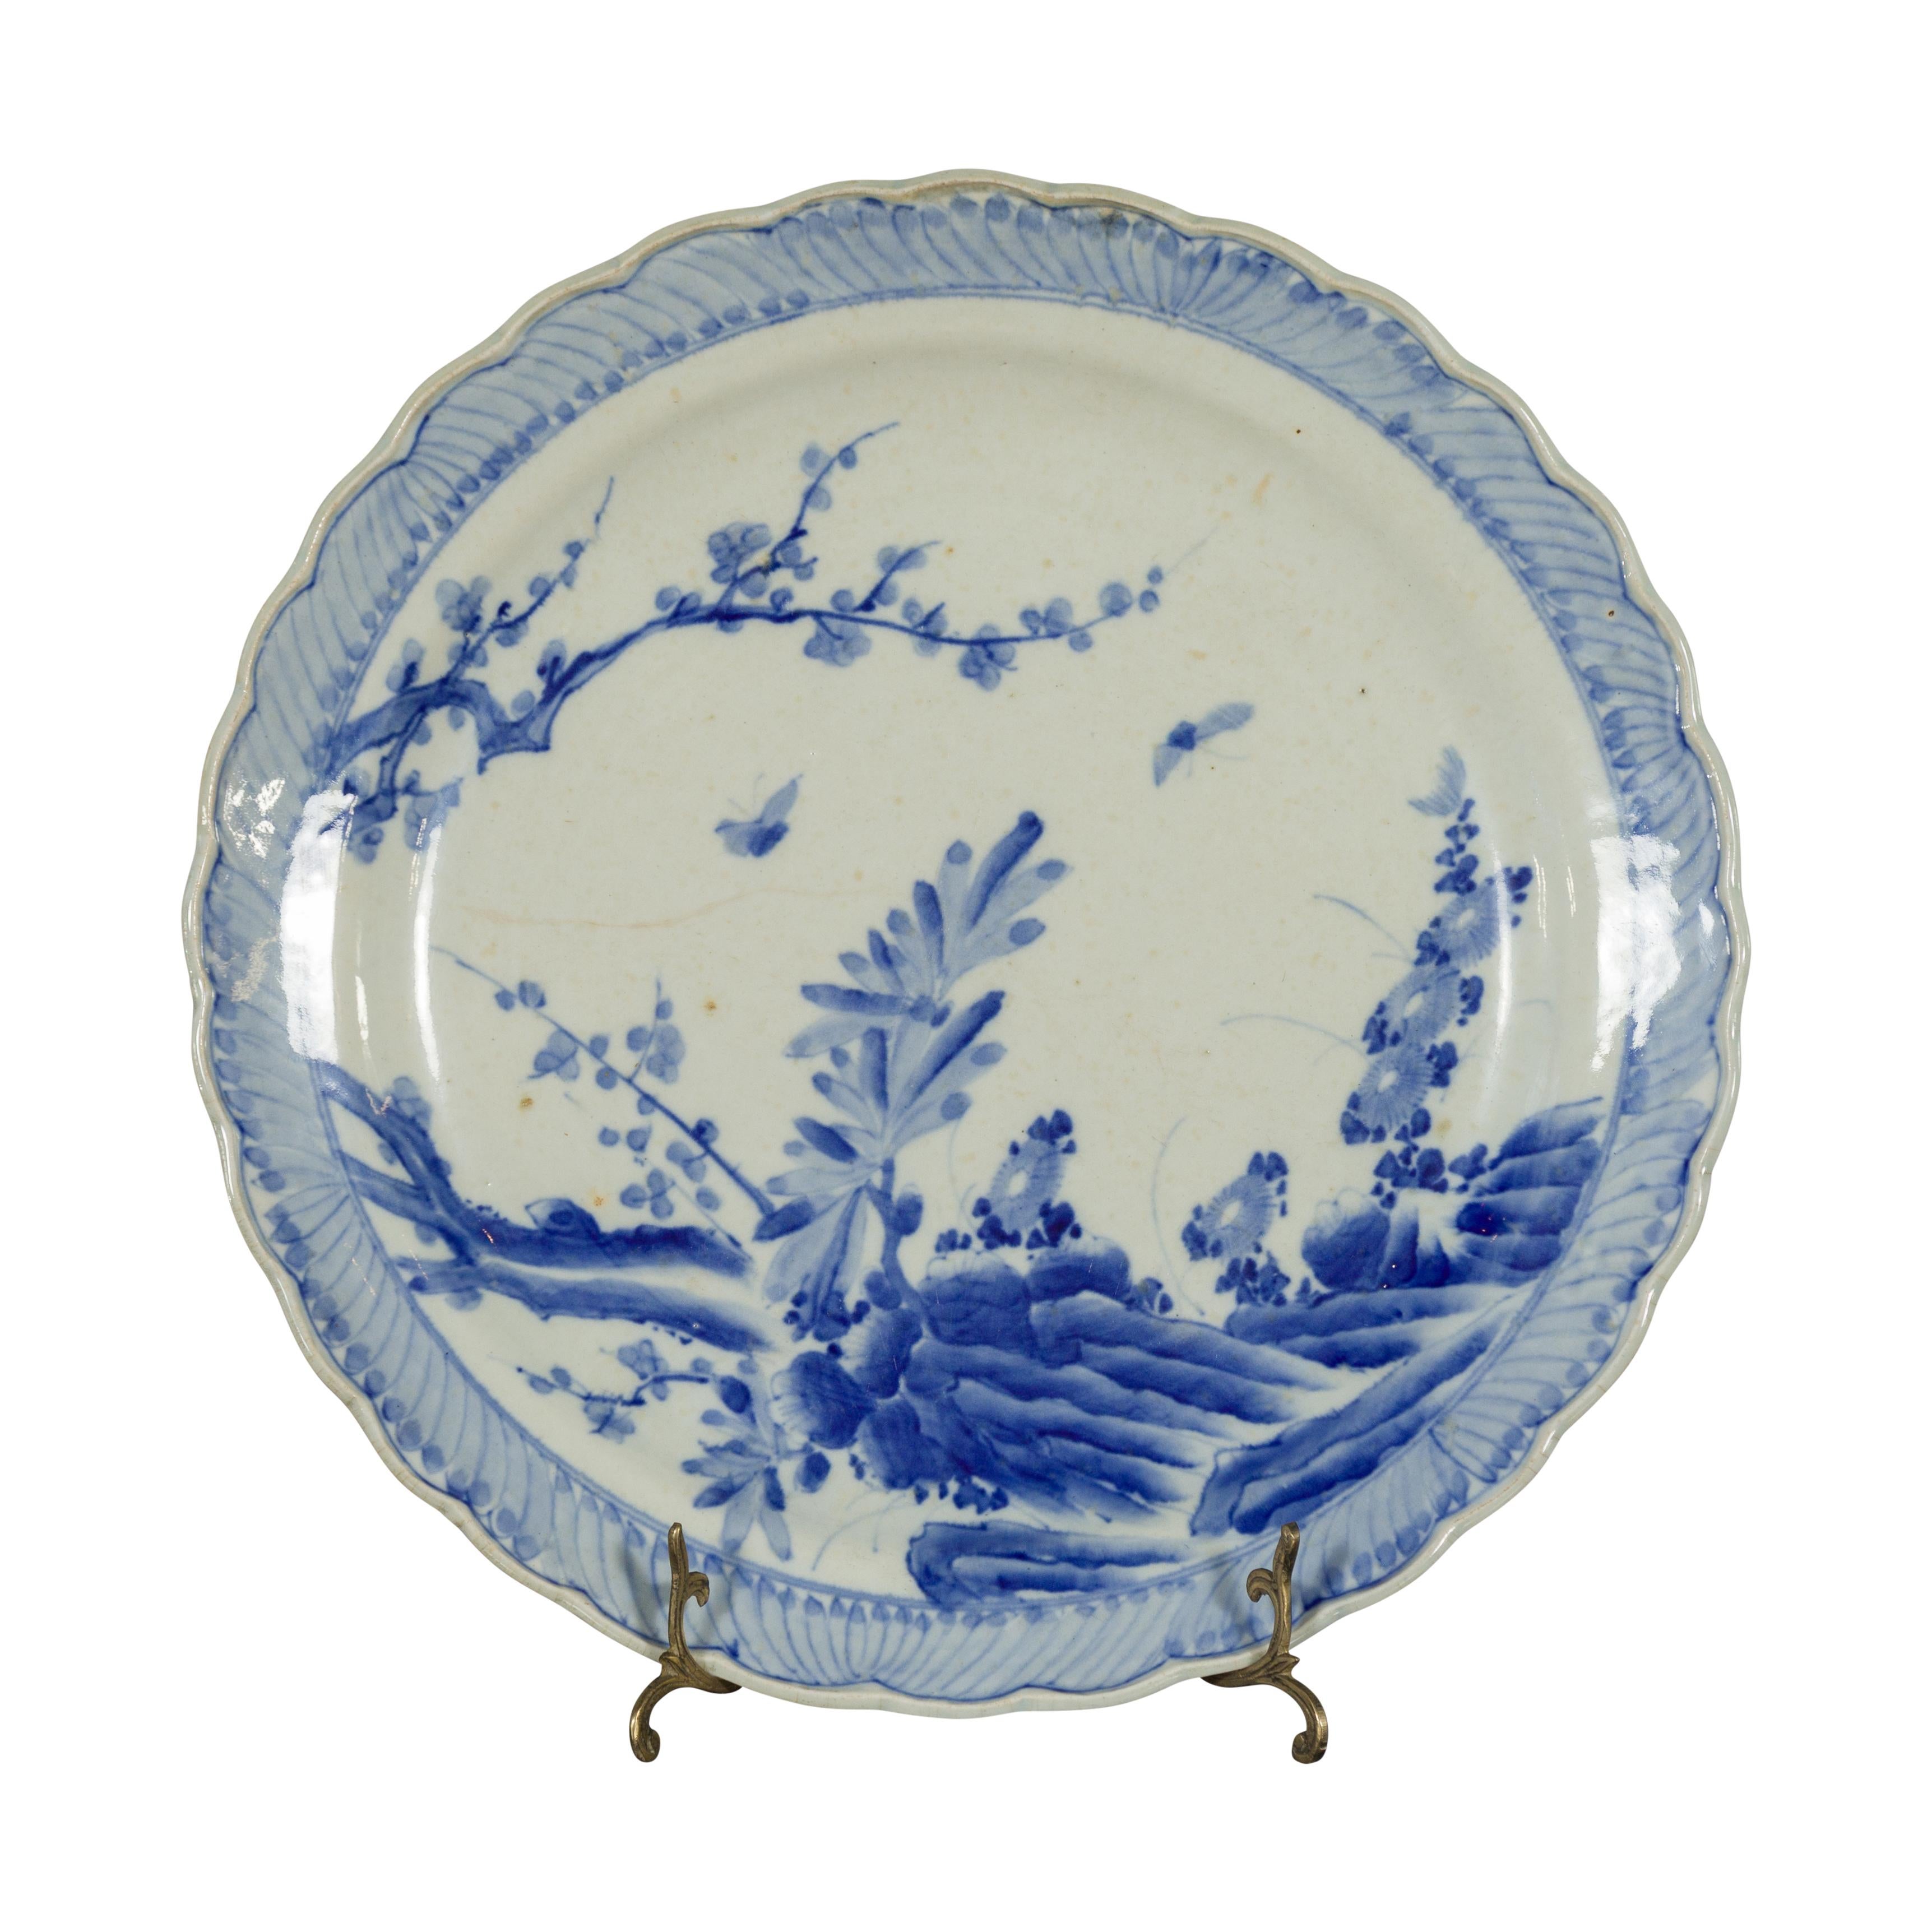 A Japanese porcelain charger plate from the 19th century, with hand-painted blue and white blooming tree, flowers and butterfly décor. Created in Japan during the 19th century, this porcelain plate features a delicate blue and white décor depicting